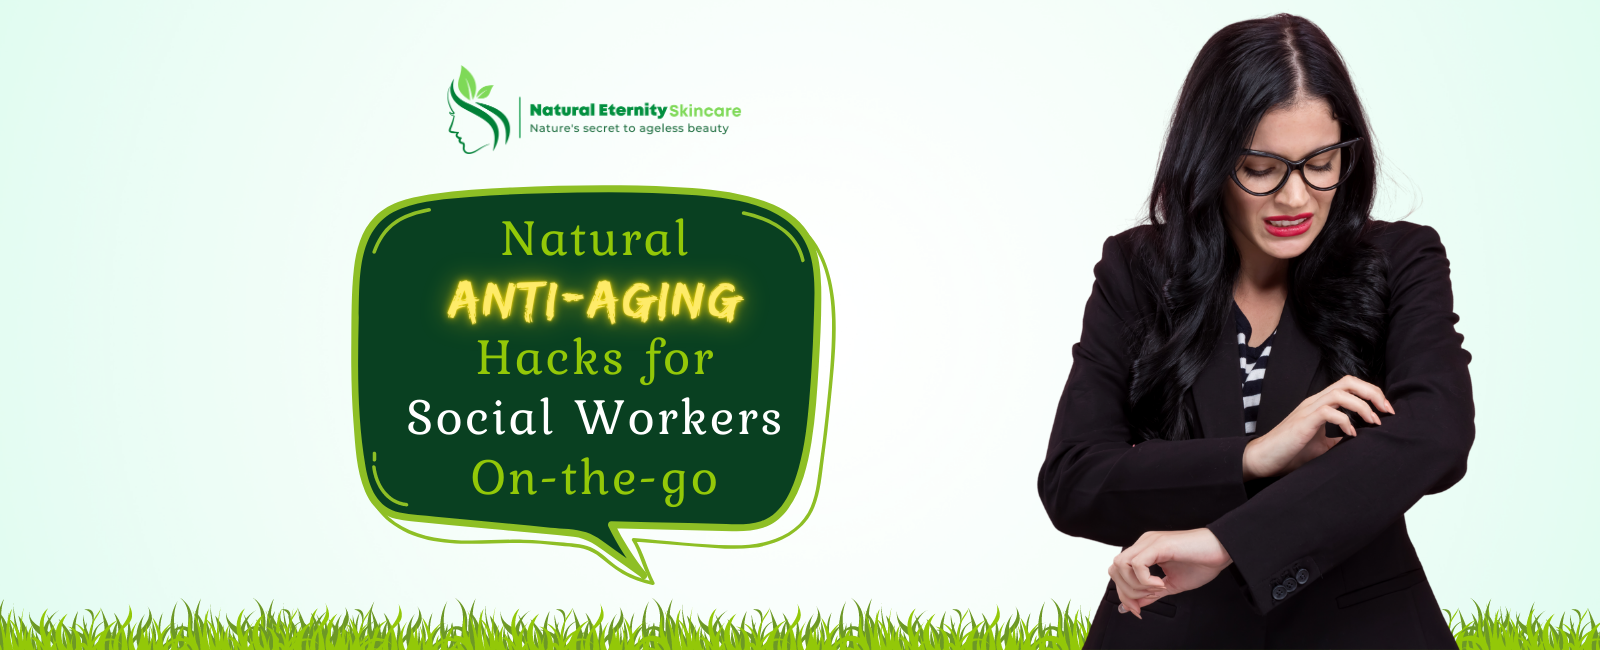 Organic Anti-Aging Solutions for Social Workers